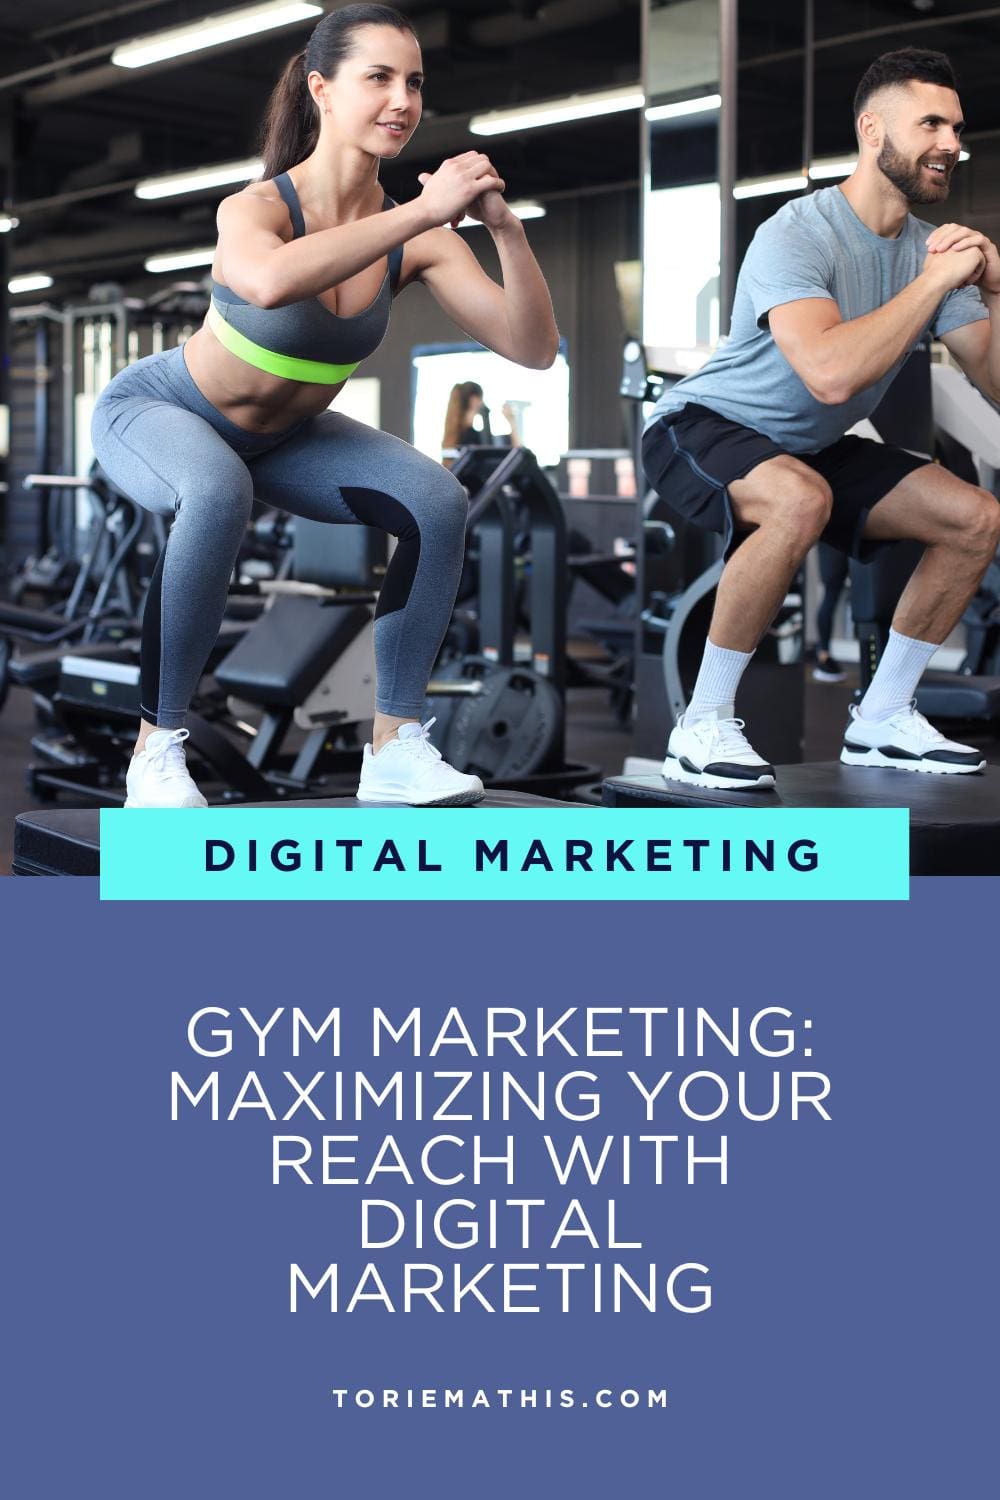 The Ultimate Guide to Gym Marketing Maximizing Your Reach with Digital Marketing